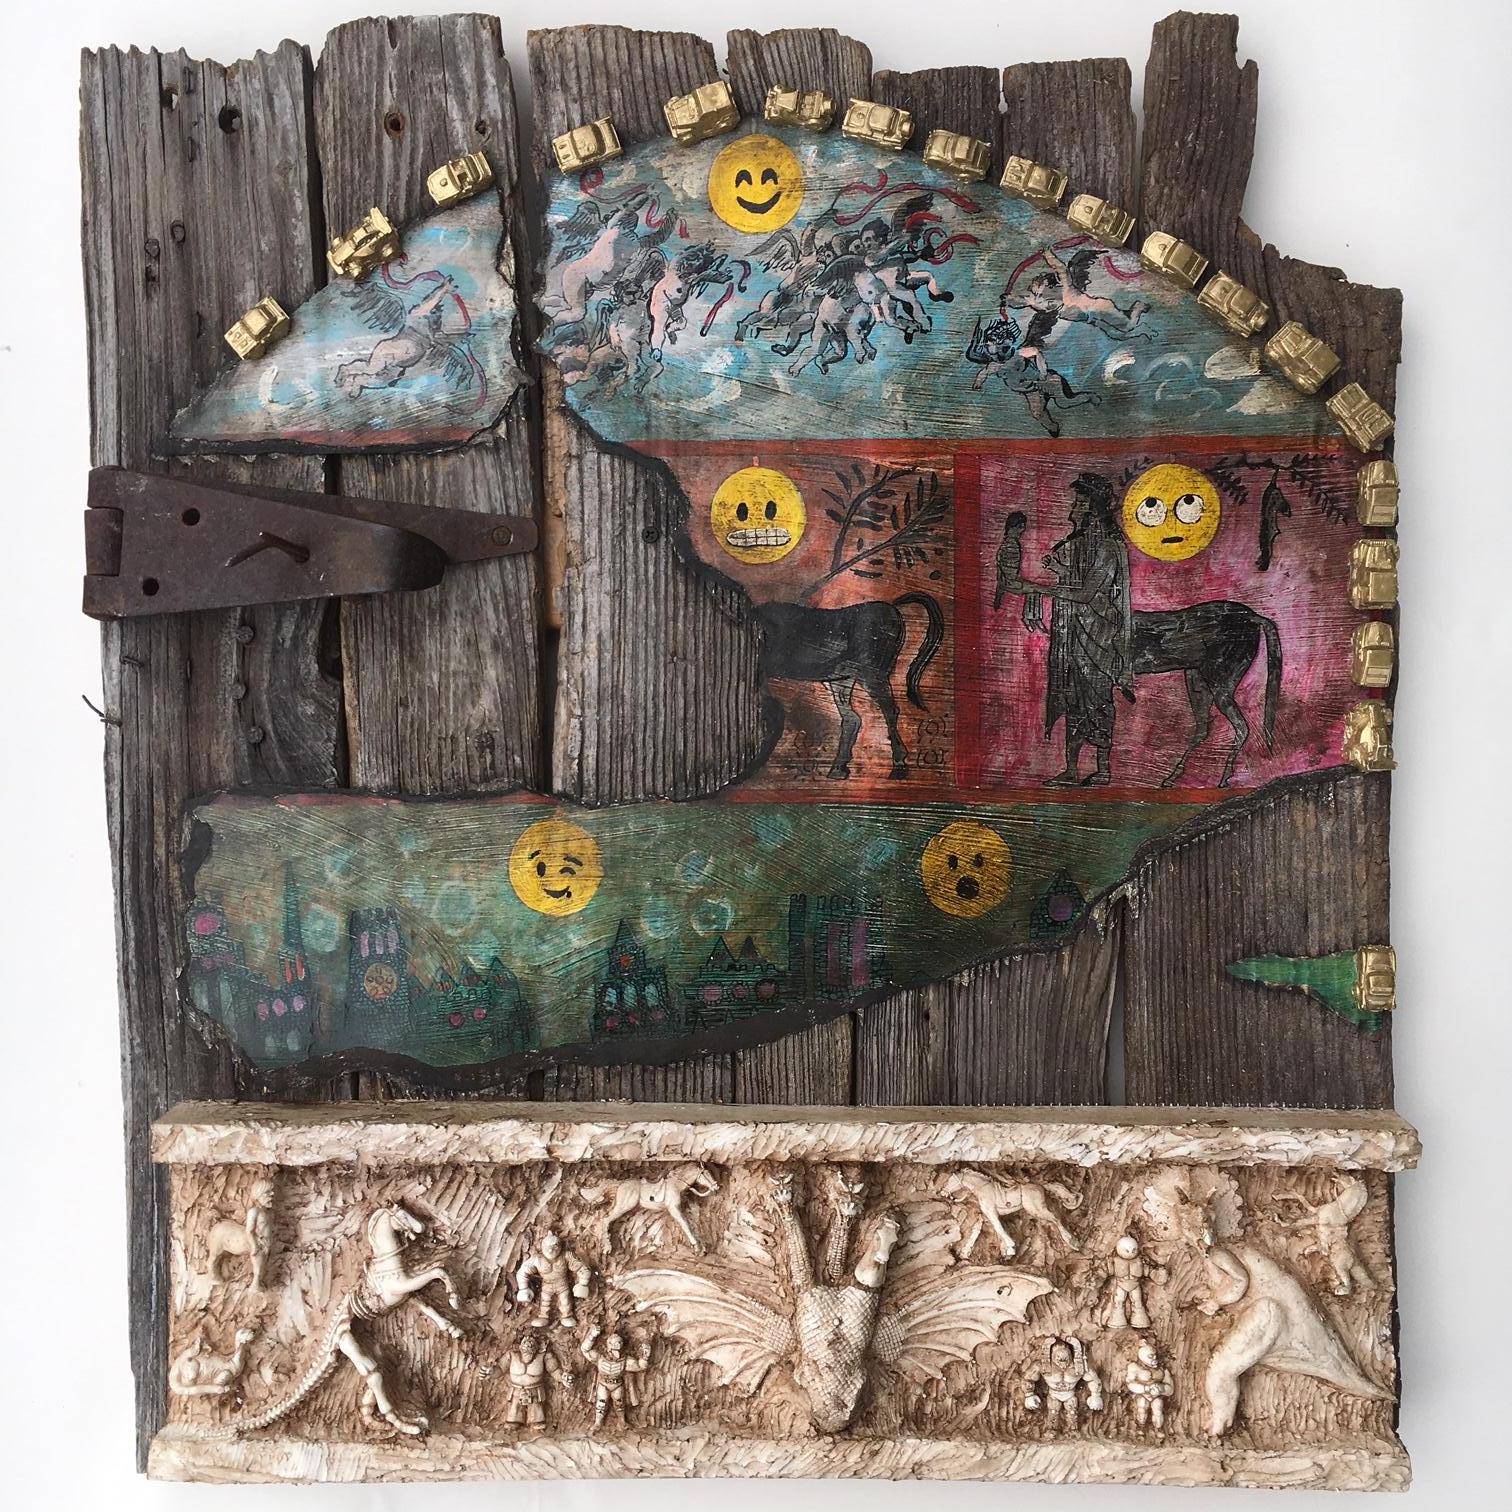 Painting & sculpture on old barn door: 'The Riddle of the Horse' - Mixed Media Art by Joshua Goode